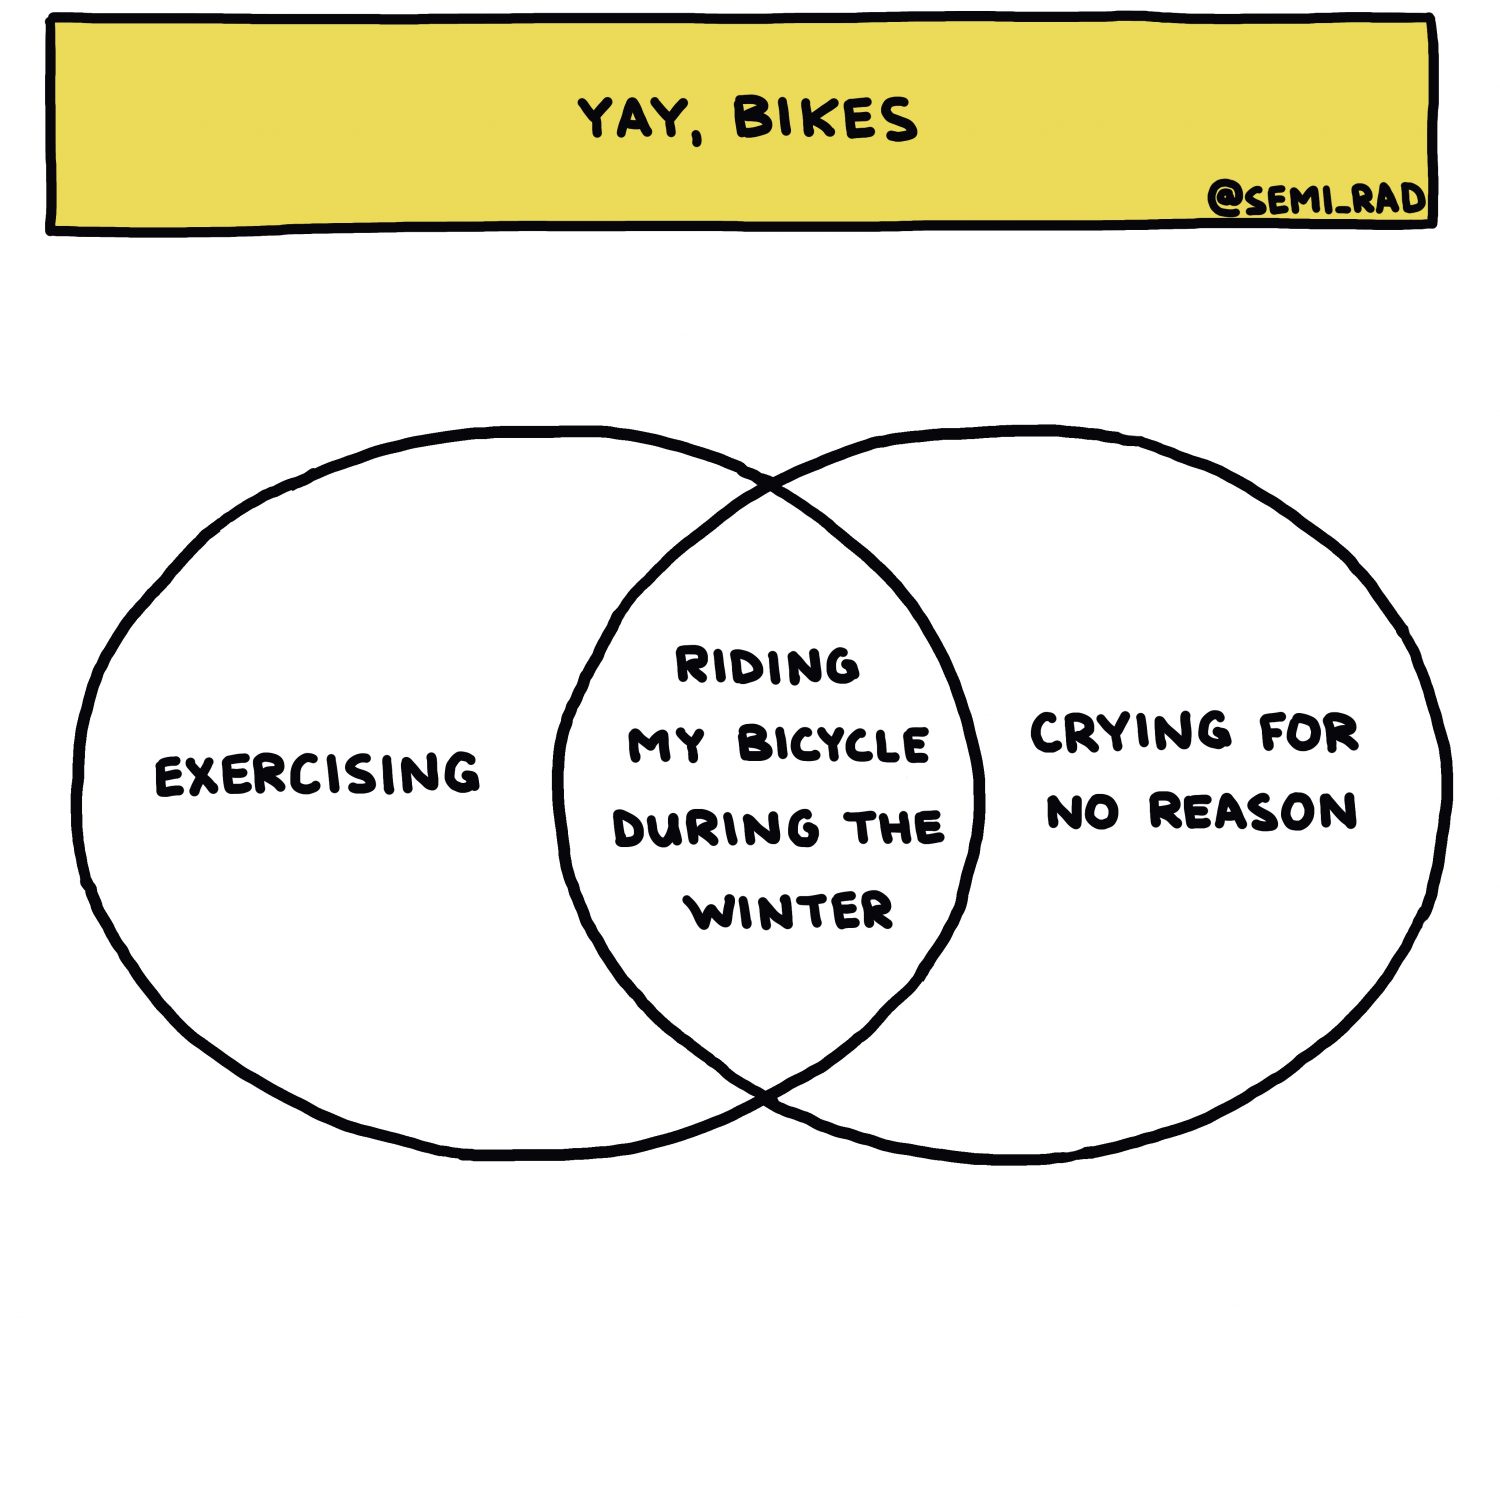 Riding My Bicycle During The Winter